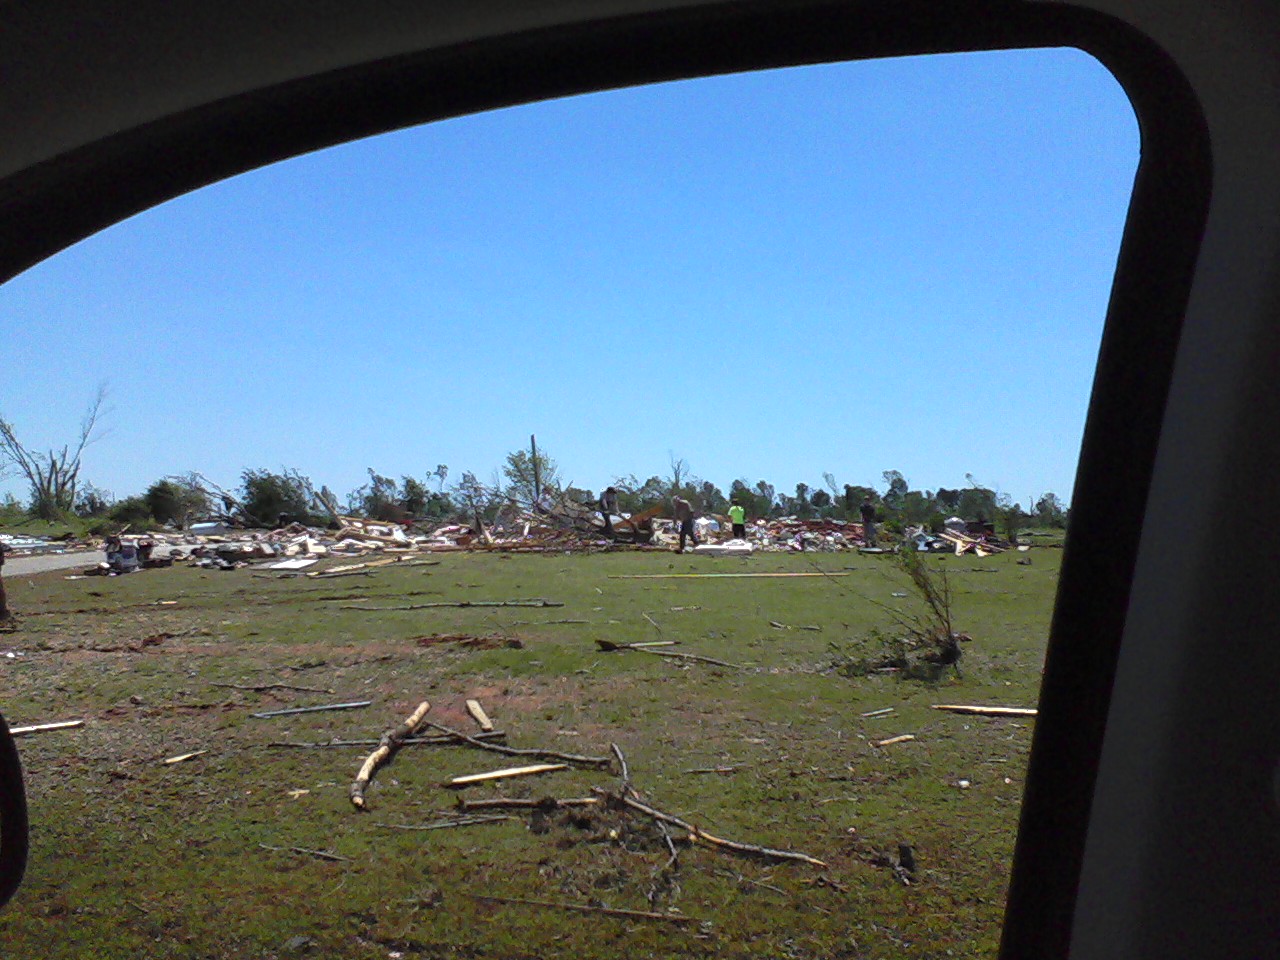 What used to be a house on the South side of Hwy 72.